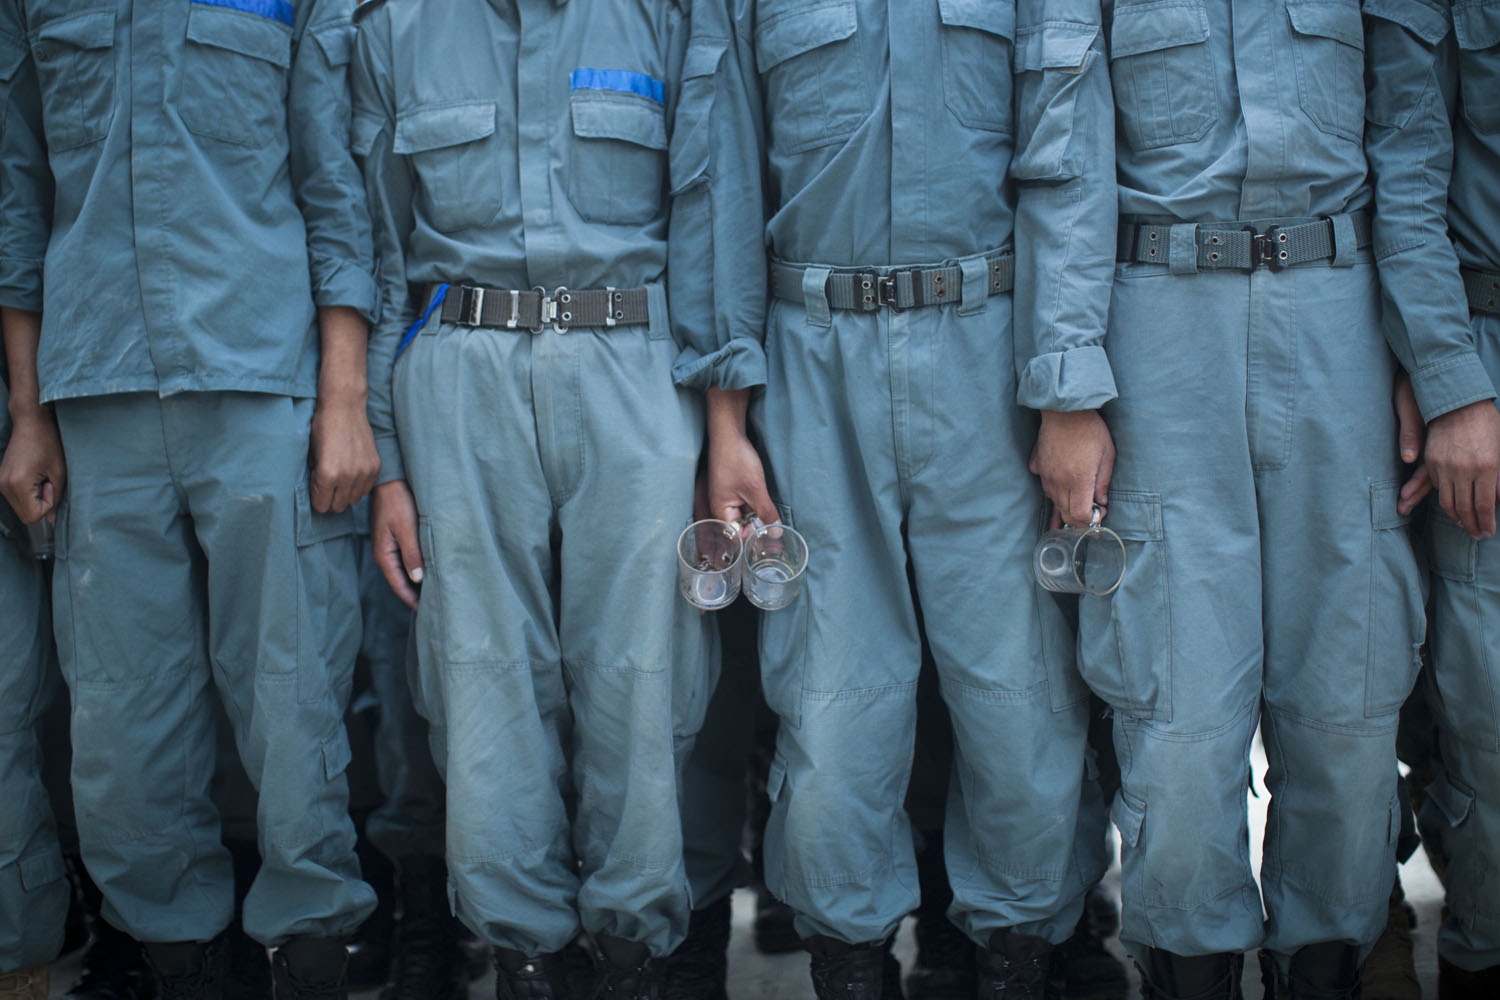 Oct. 9, 2012. Afghan National Police officers line up with their tea glasses before breakfast at the Police Academy in Kabul.